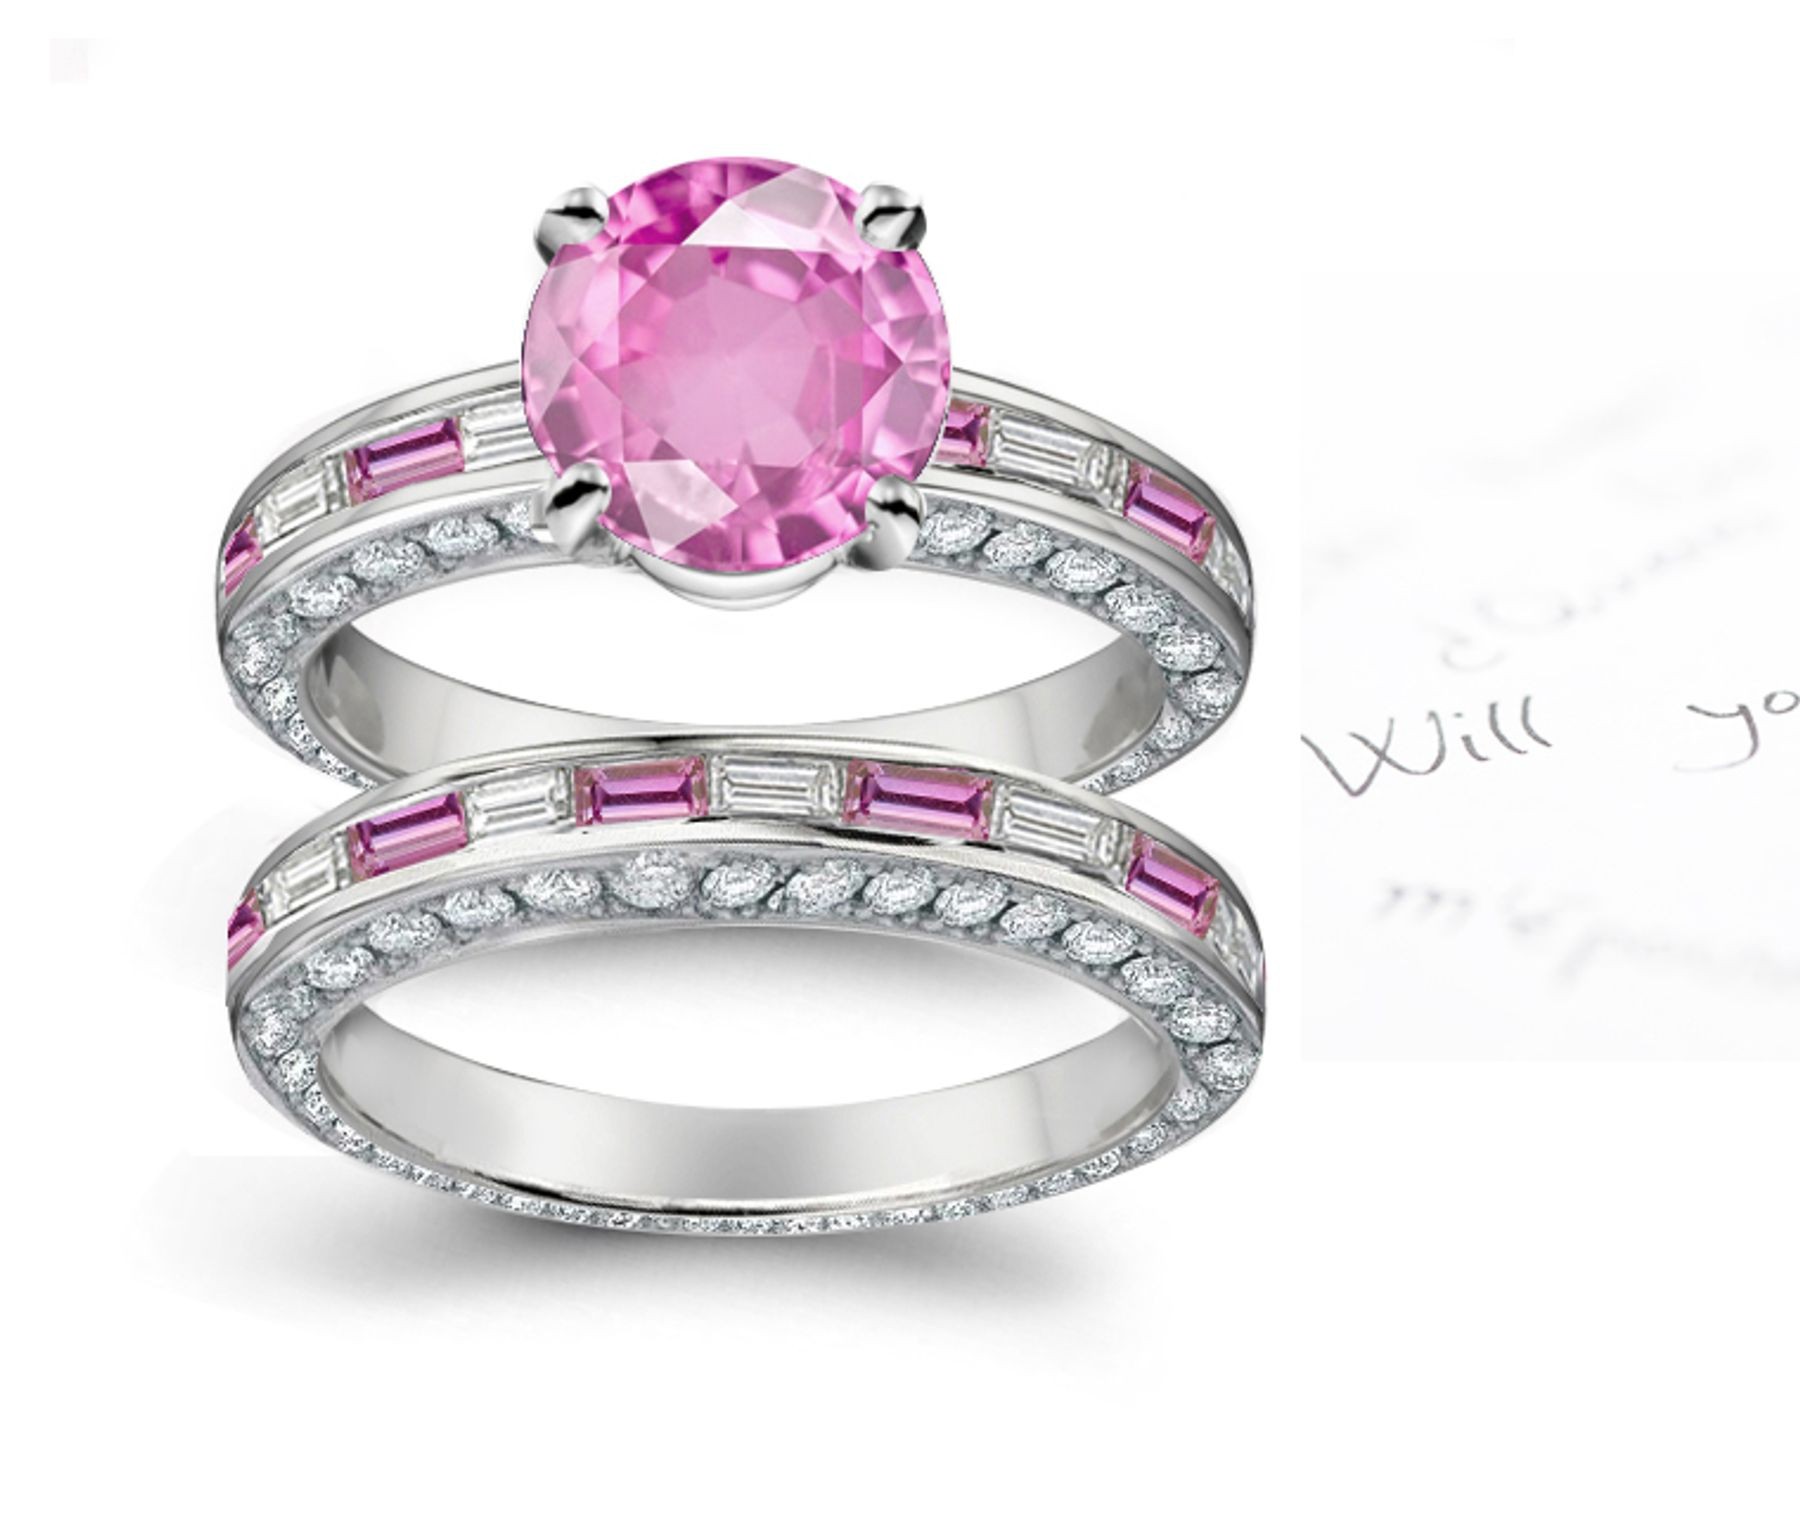 A timeless, design with a deep pink 1.0 carat Popular Sapphire & halo of well-cut White Diamonds sapphires